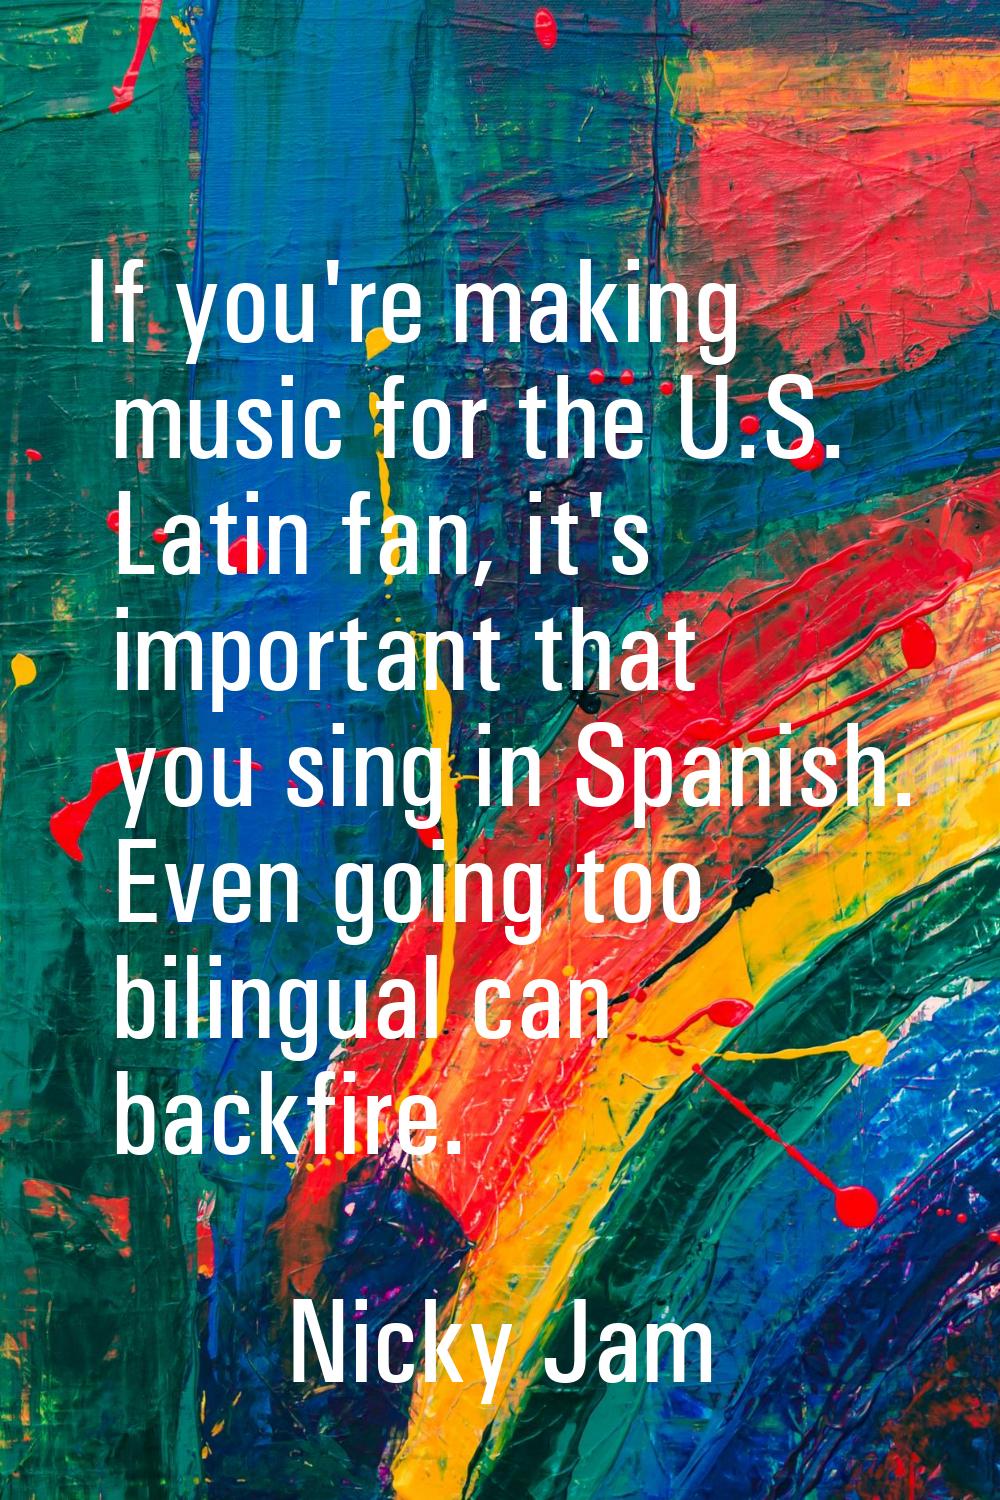 If you're making music for the U.S. Latin fan, it's important that you sing in Spanish. Even going 